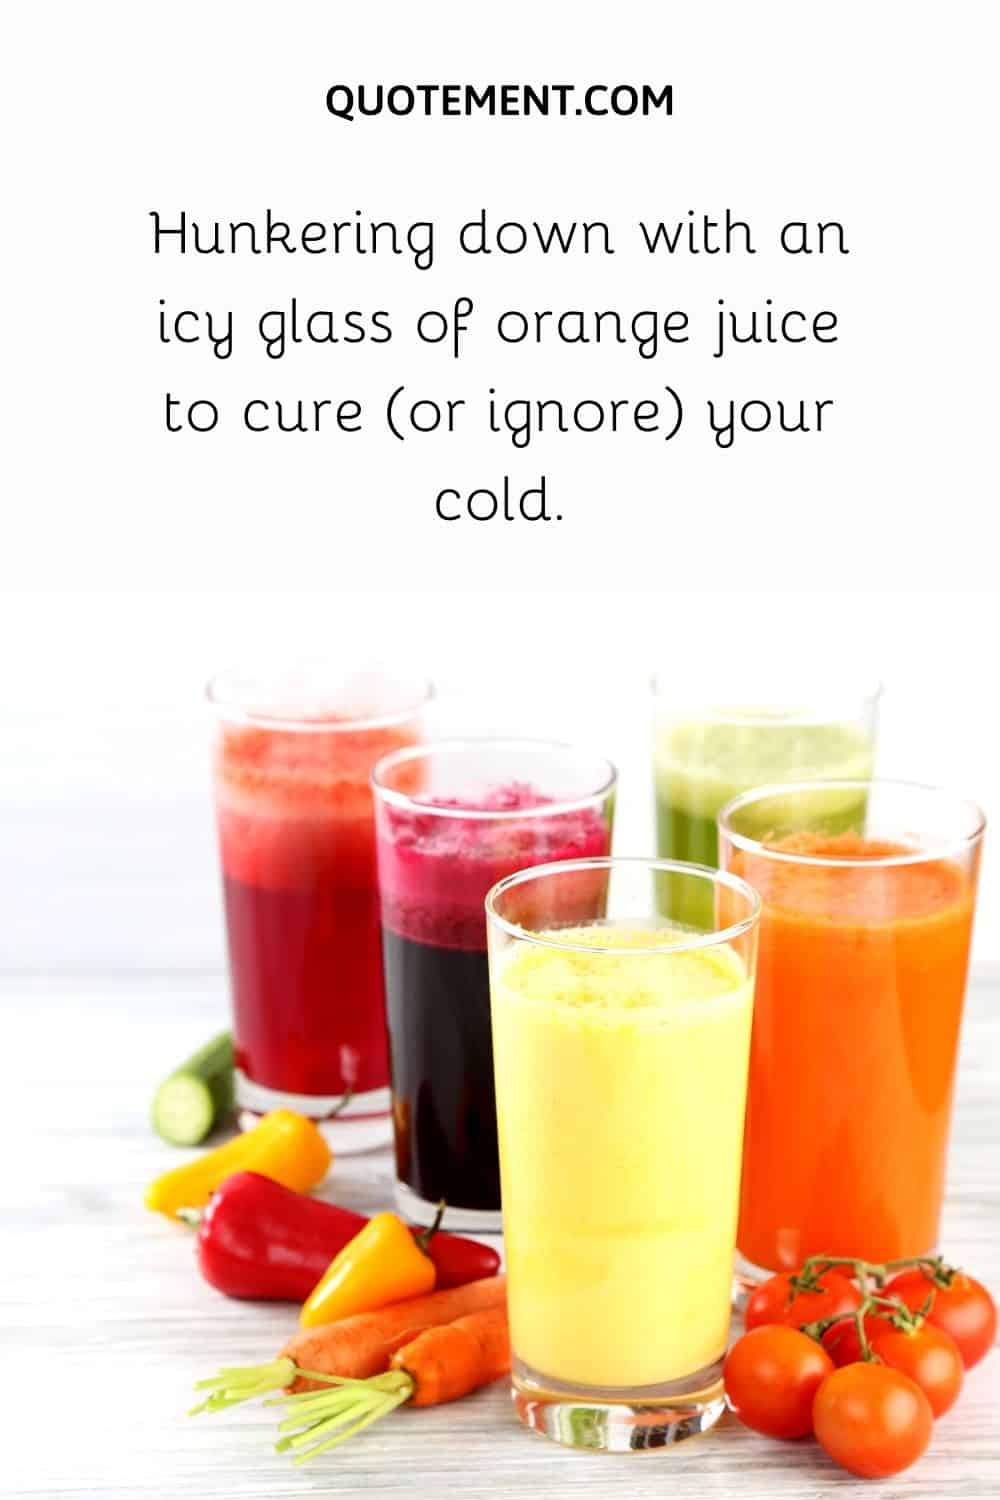 Hunkering down with an icy glass of orange juice to cure (or ignore) your cold